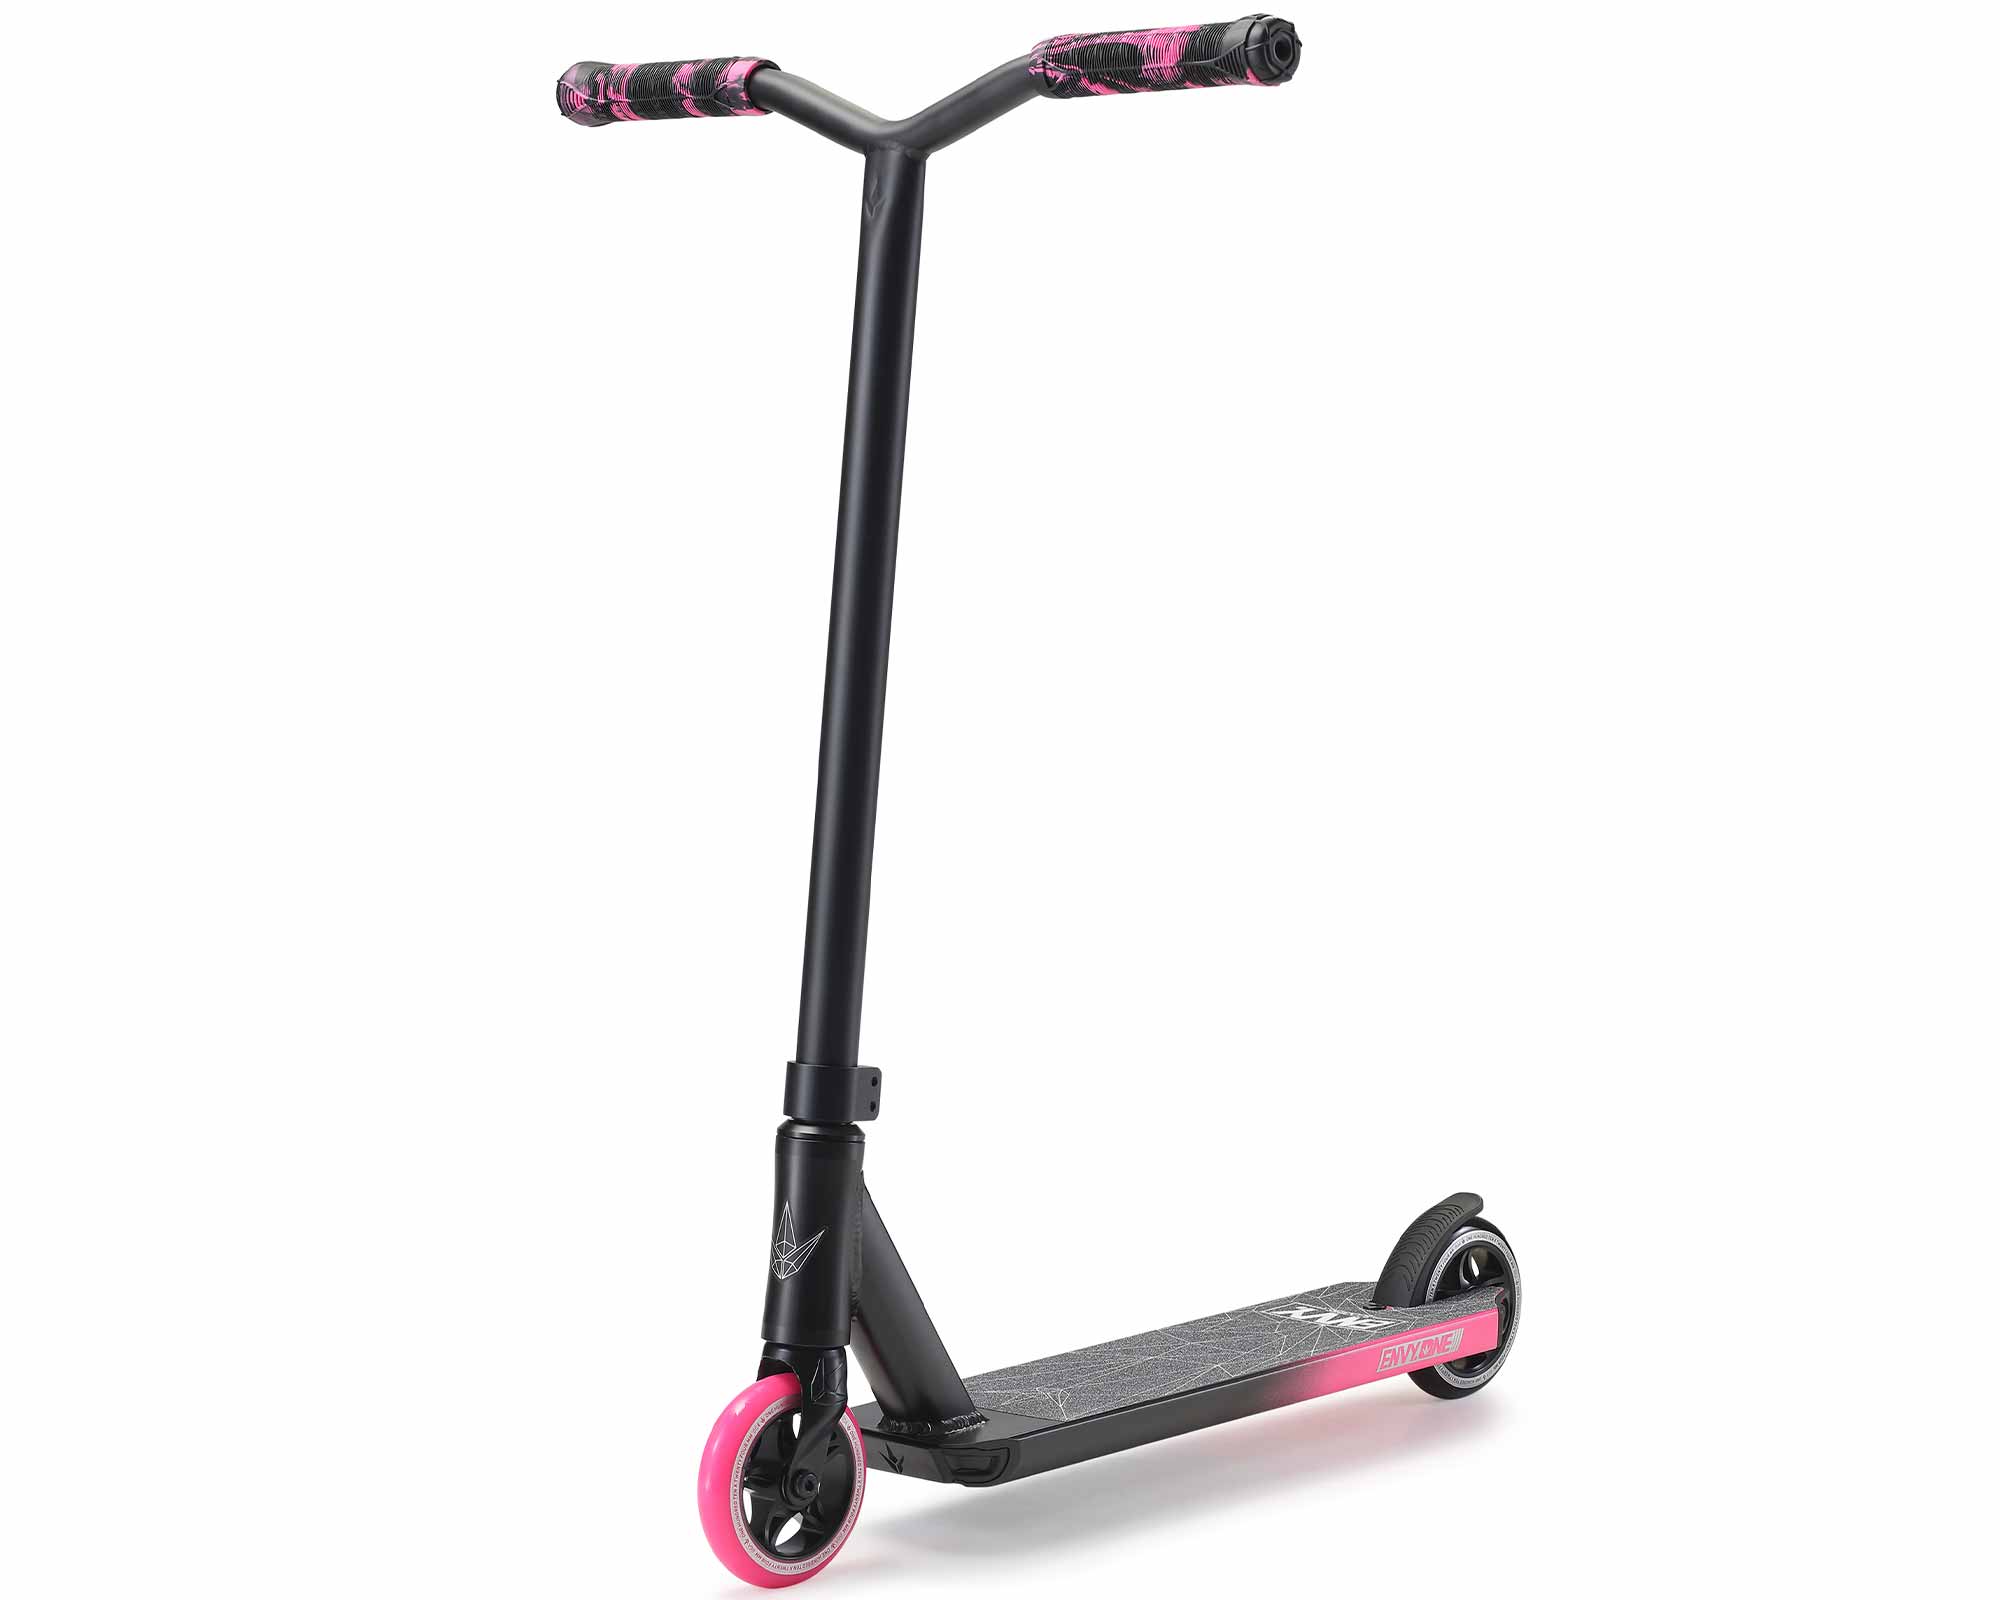 Envy One S3 Pro Black/Pink – Scooter Hut